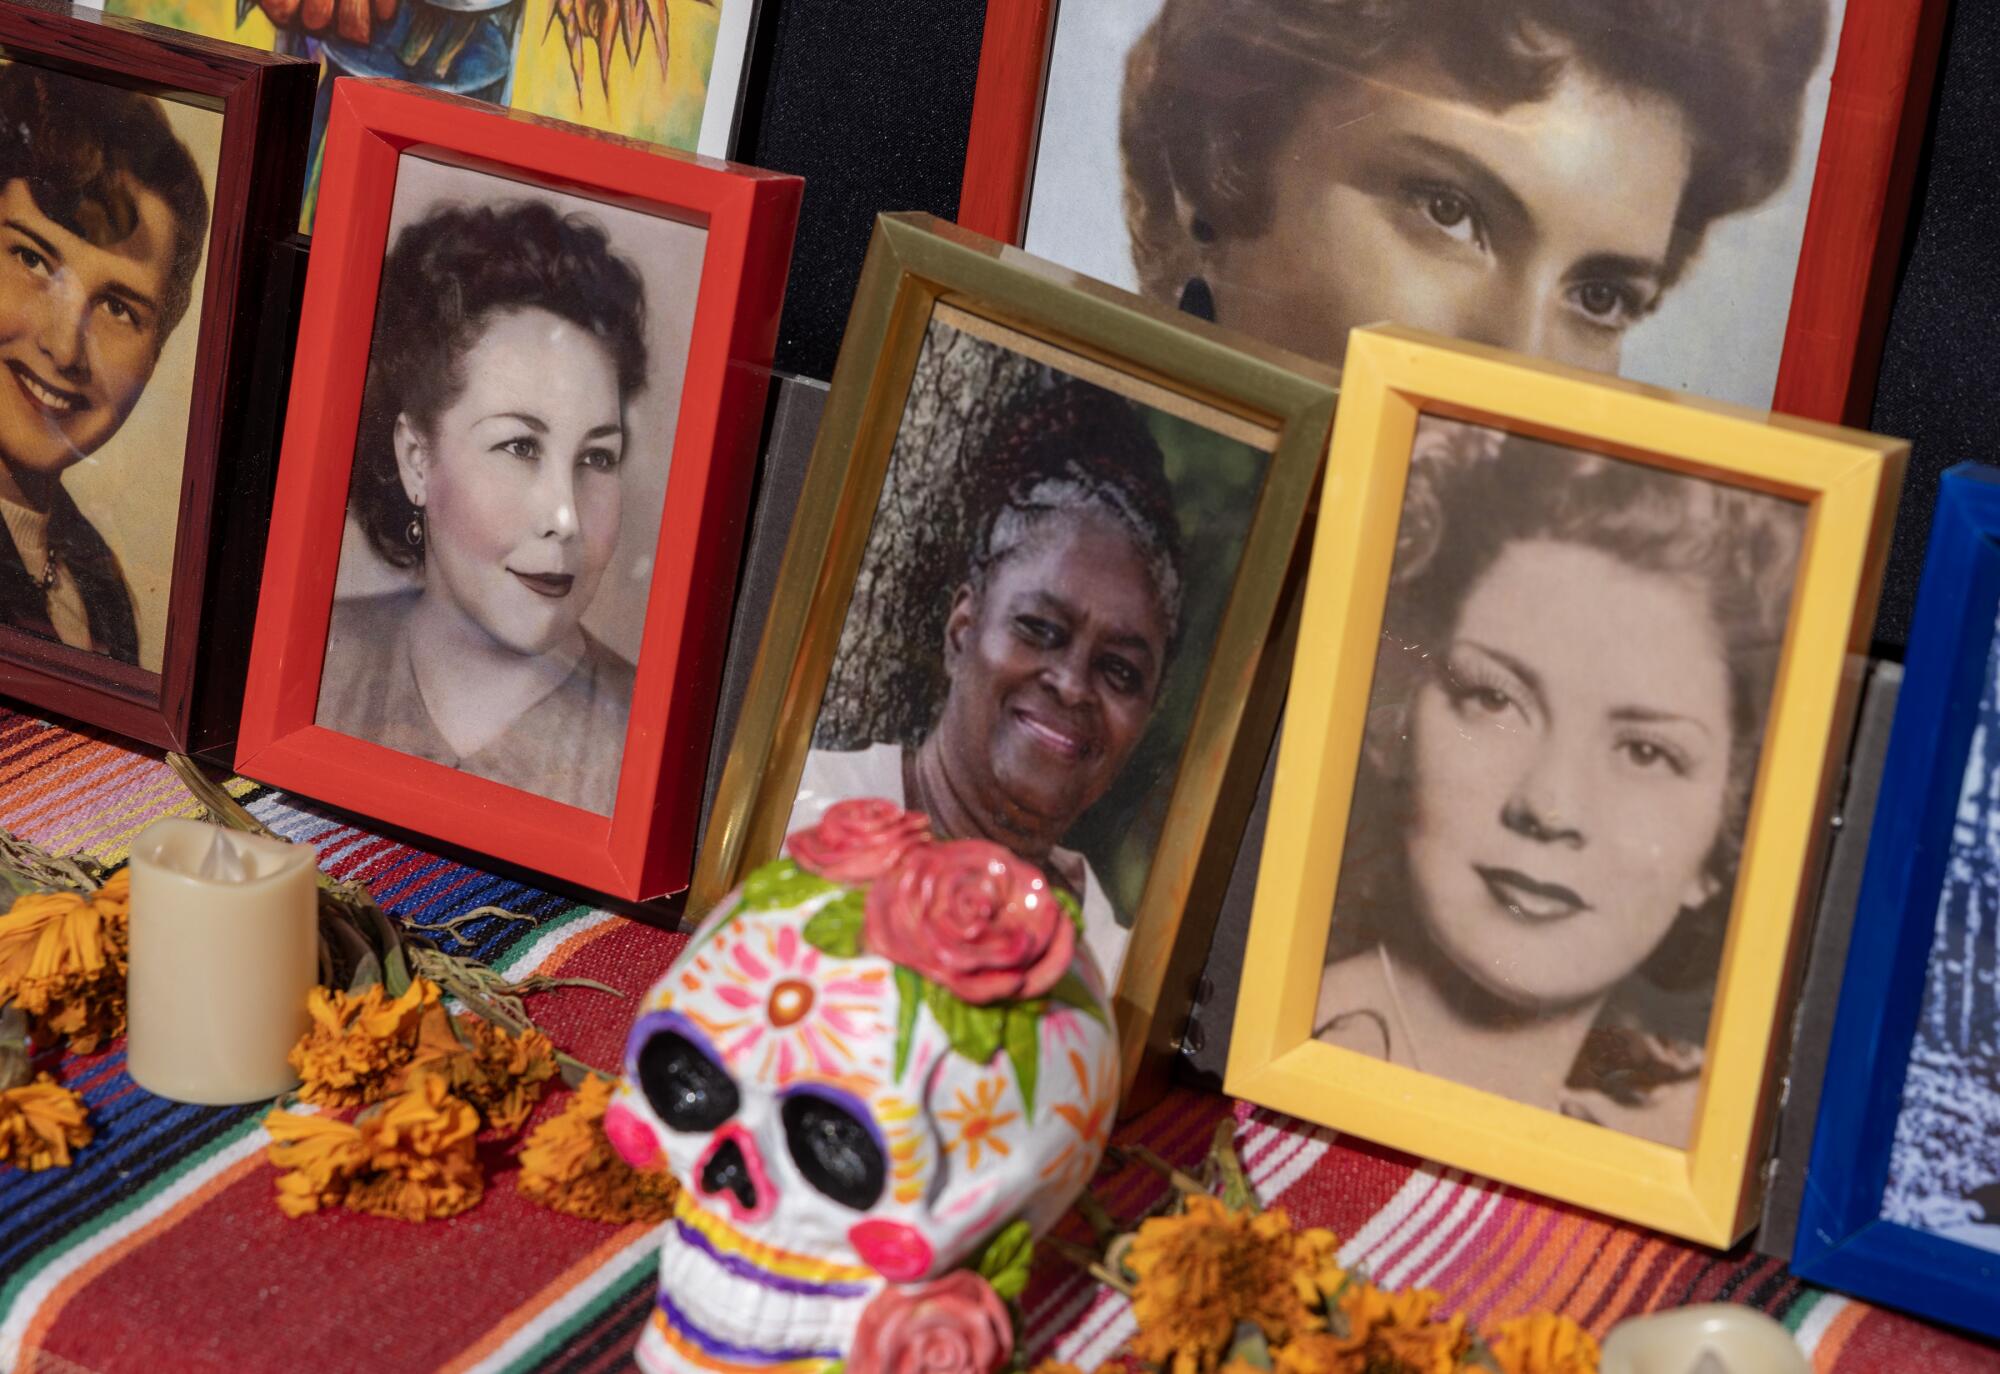 Pictures of loved ones rest on an altar near a painted skull sculpture and flowers.